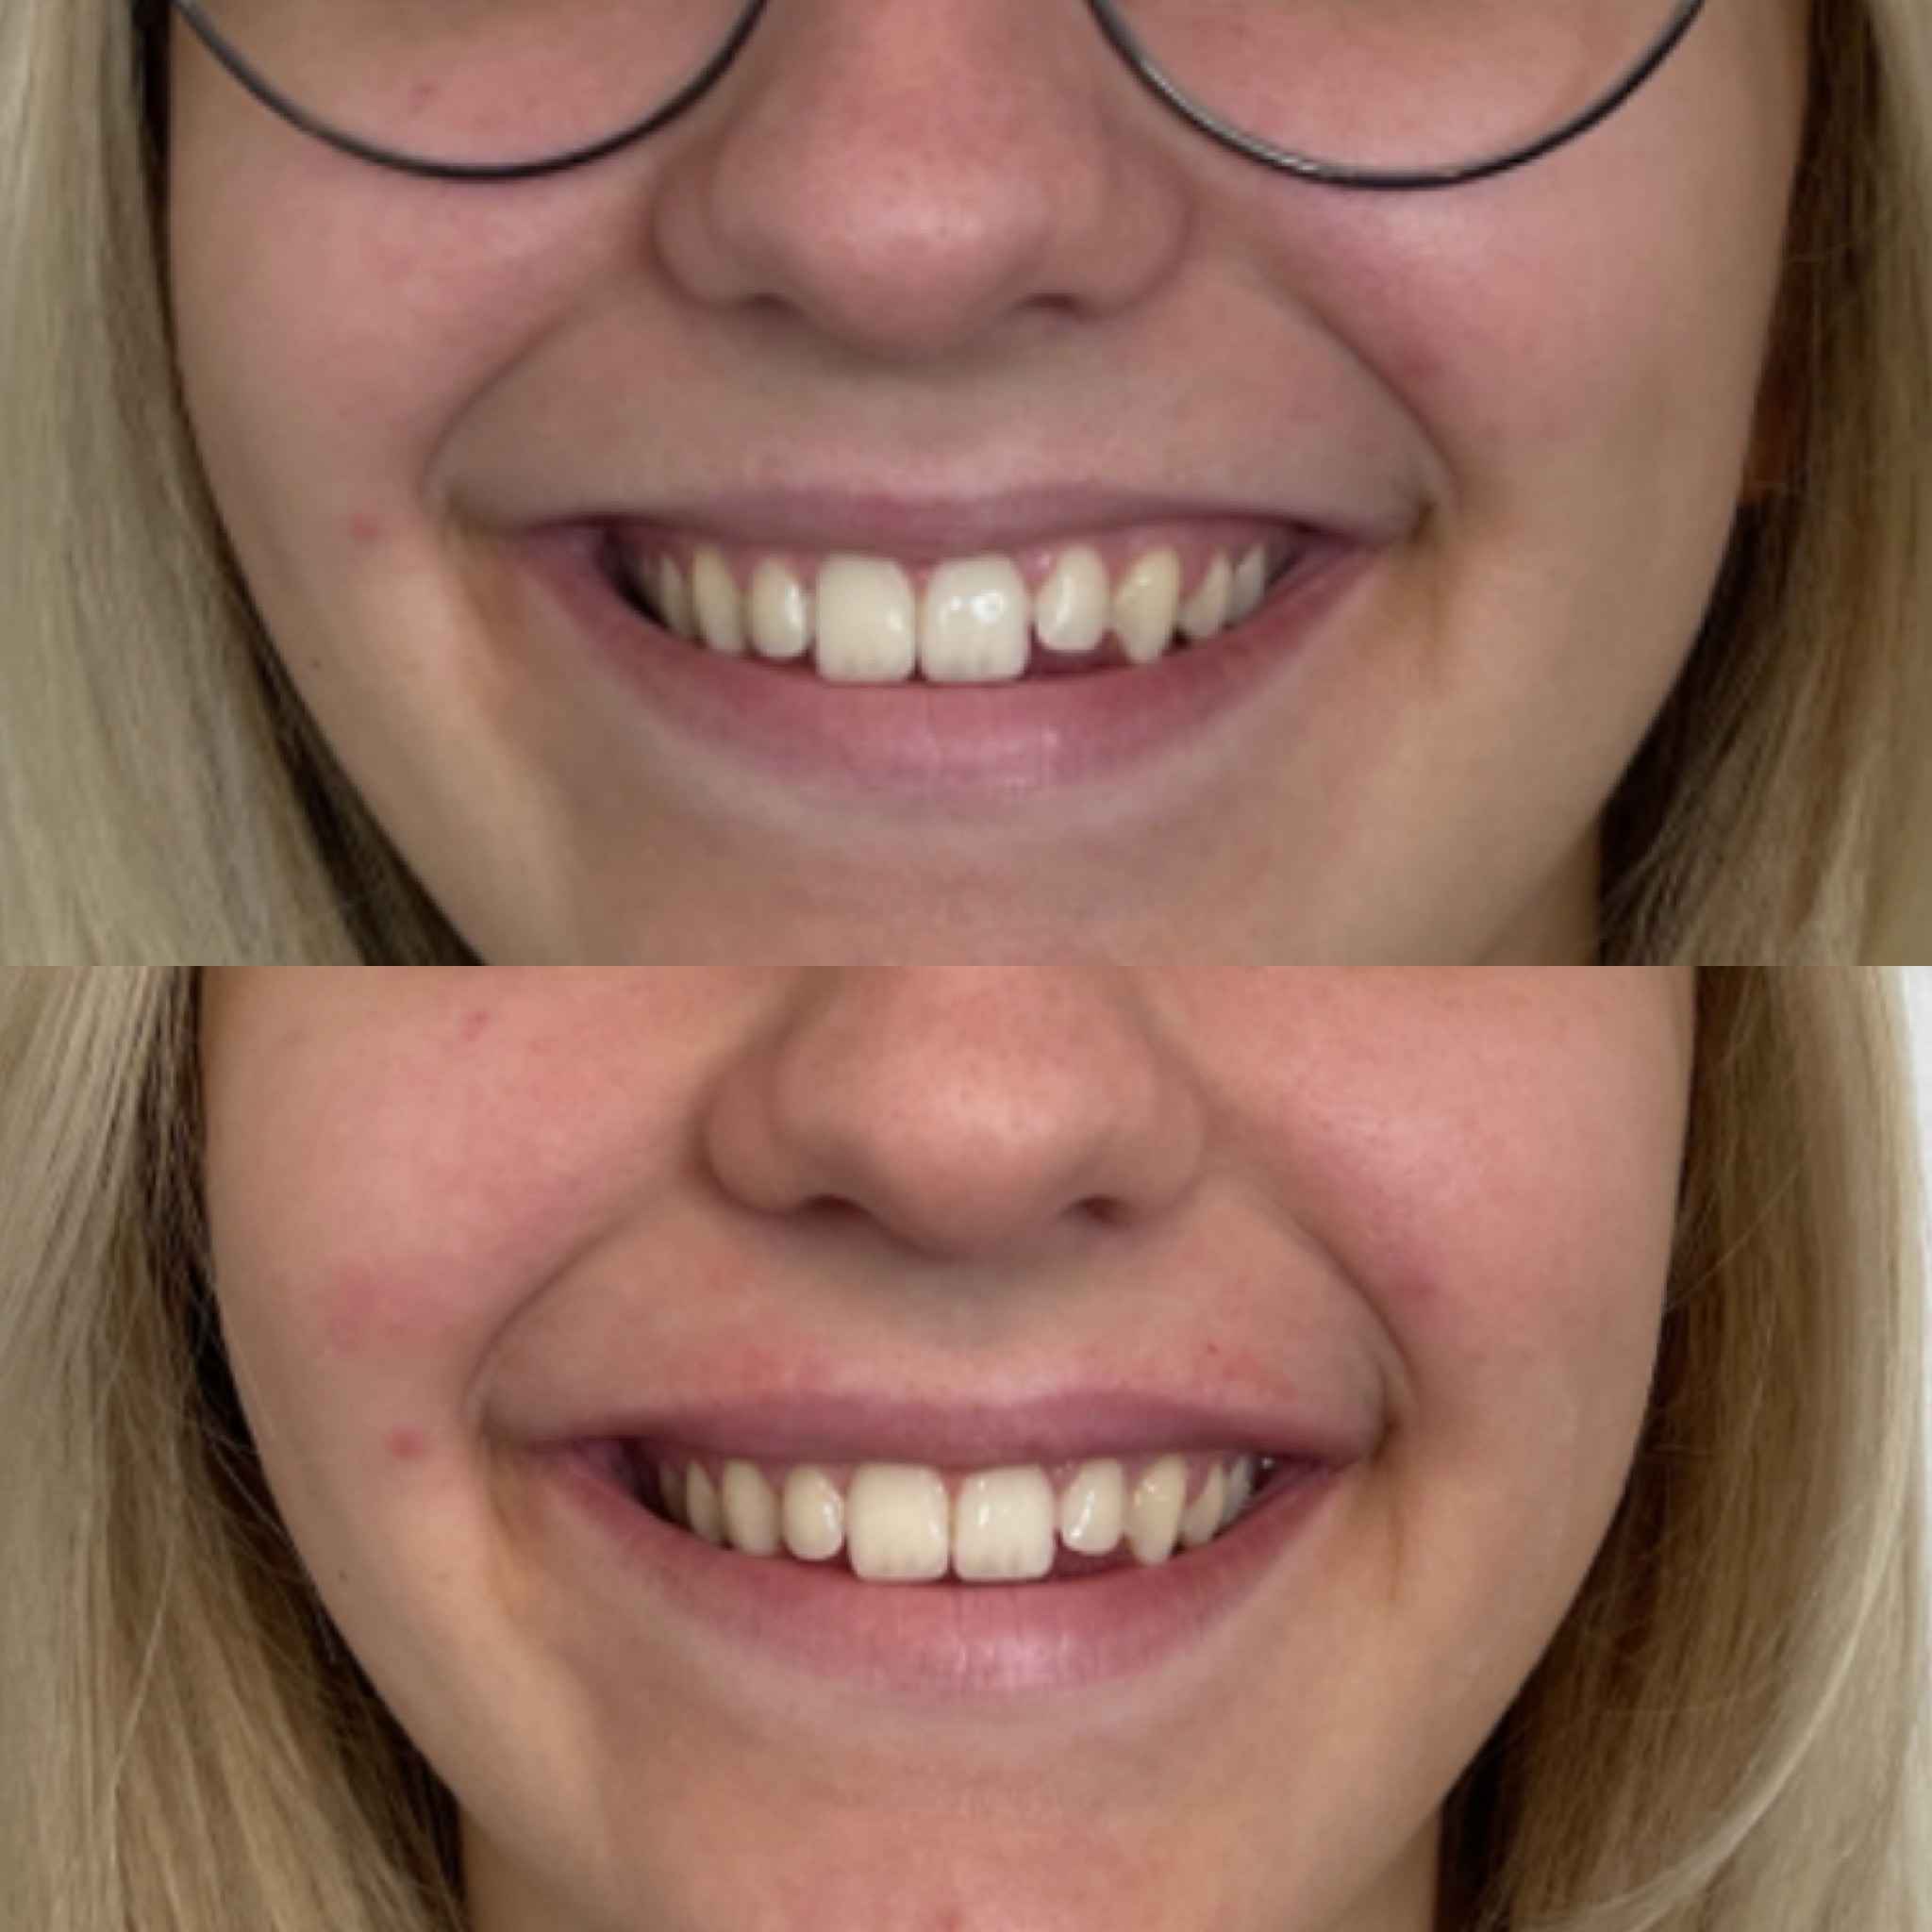 Smile Before and After Fillers Treatment | Onyx Medical Aesthetics | Homann Dr. S.E. suite B Lacey, WA